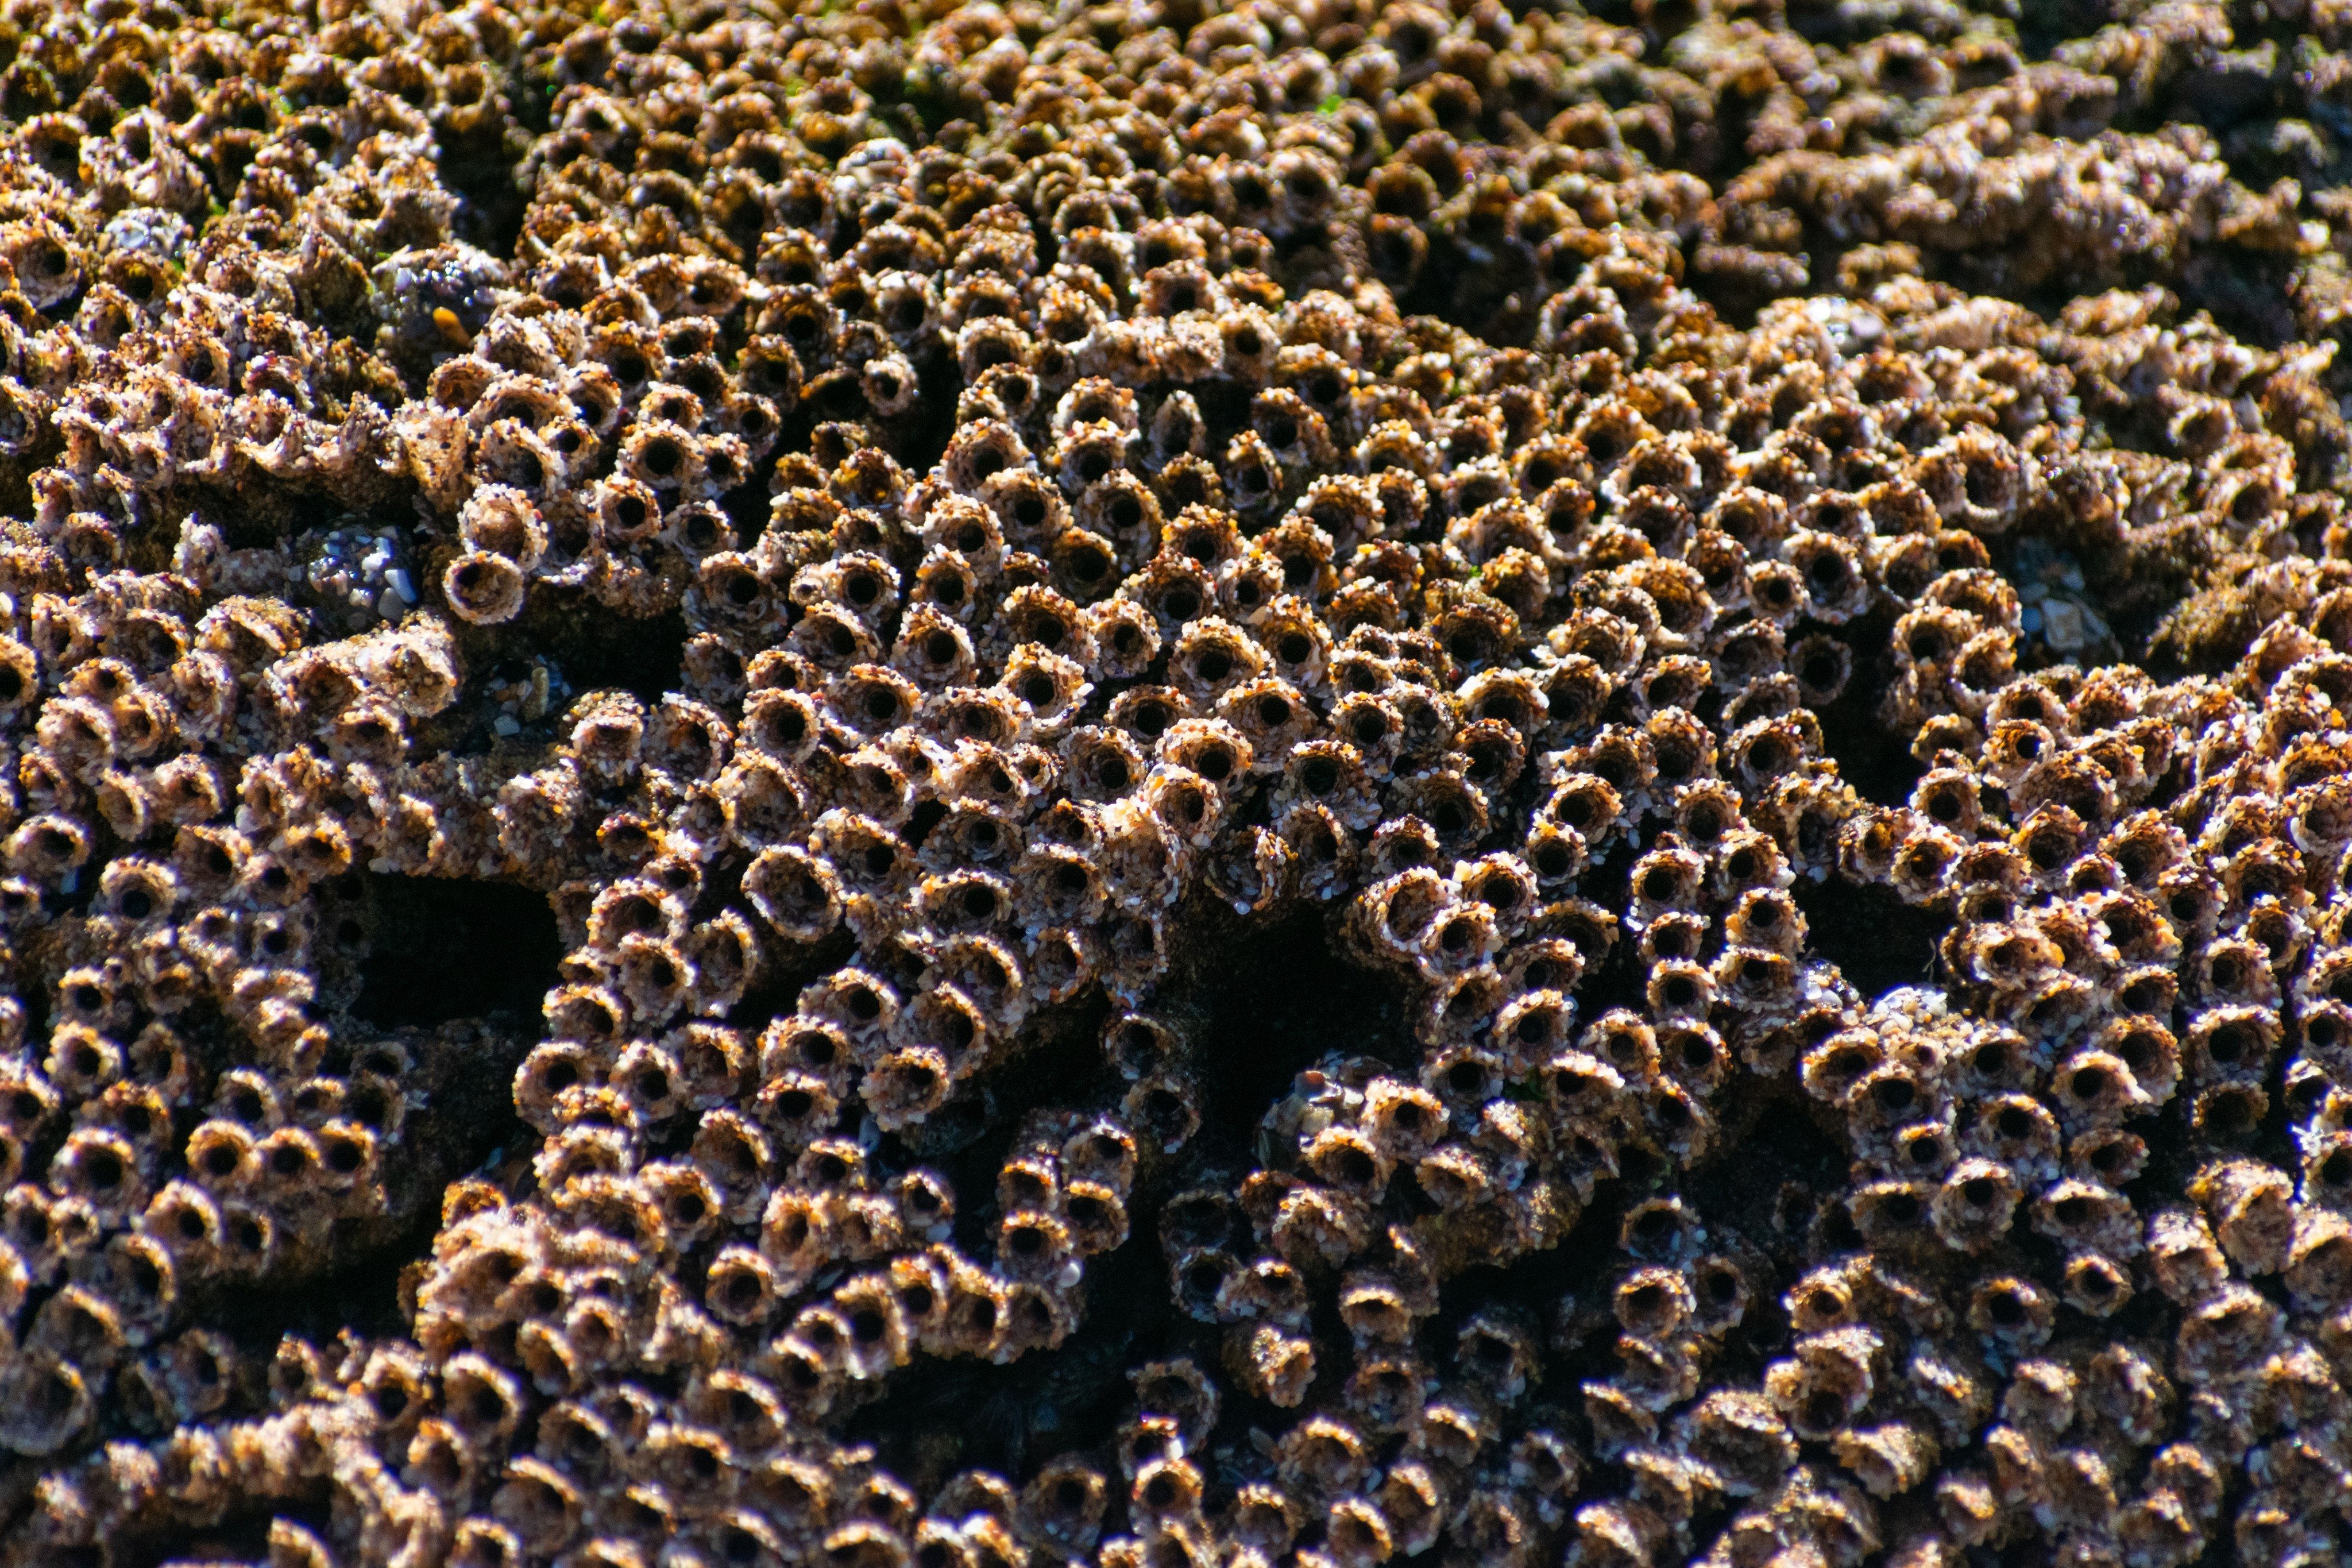 Sandcastle worms, which are found along the Californian coast, make their honeycomb-like colonies by binding grains of sand together. Photo: Shutterstock